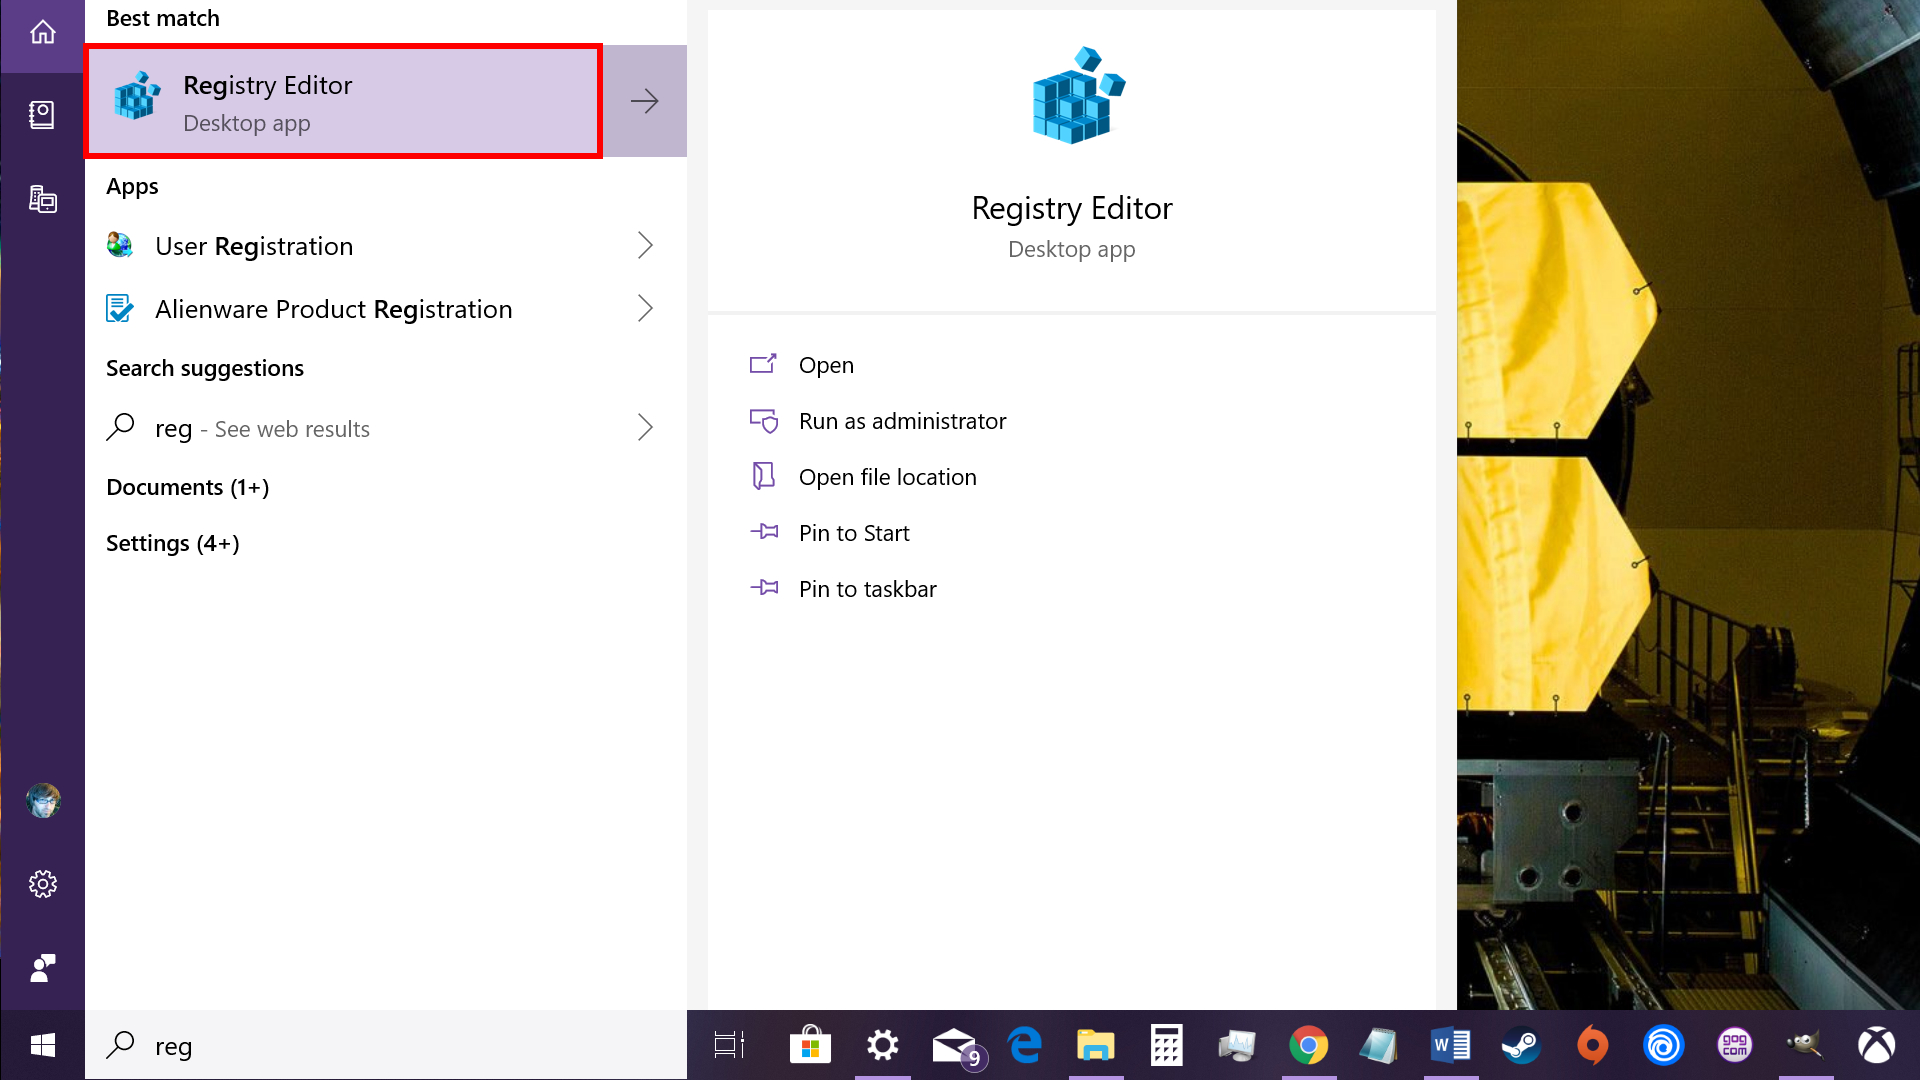 Windows 10 open the registry editor - How to use notifications in Windows 10